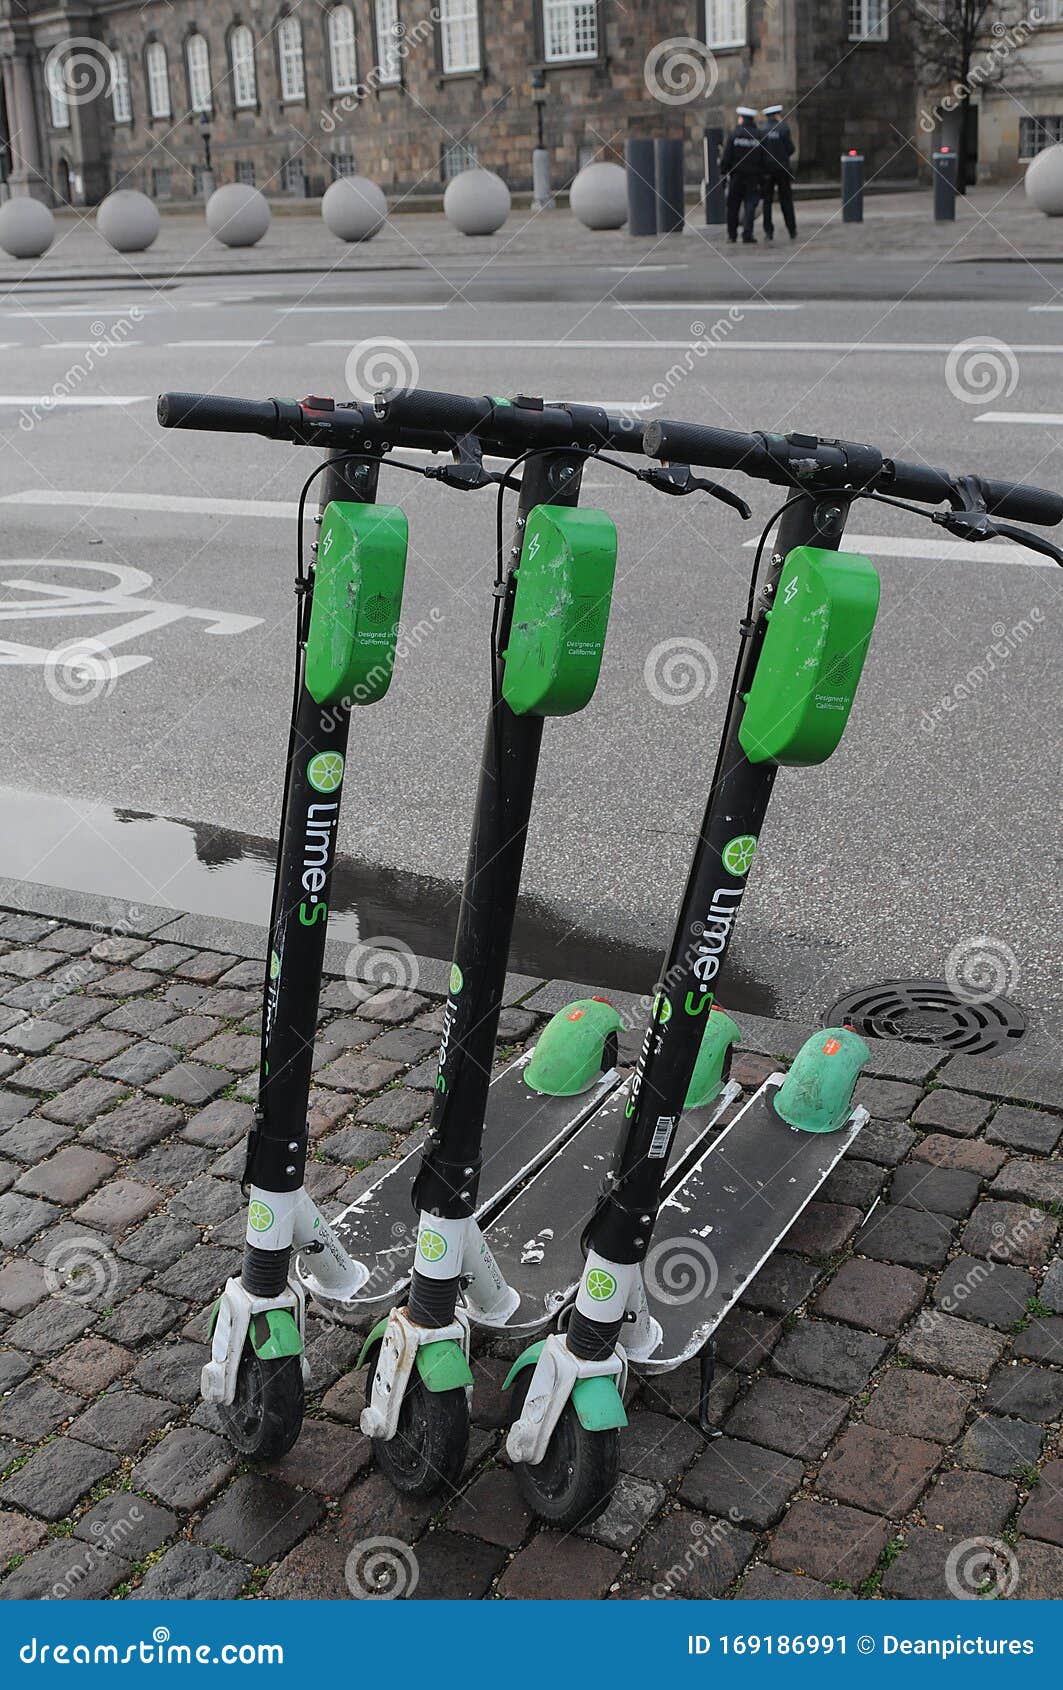 Umeki mikro klap LIME or LIME S ELECTRIC SCOOTERS are CALIFORNIA DESIGN Editorial Photo -  Image of scooters, kopemhagen: 169186991